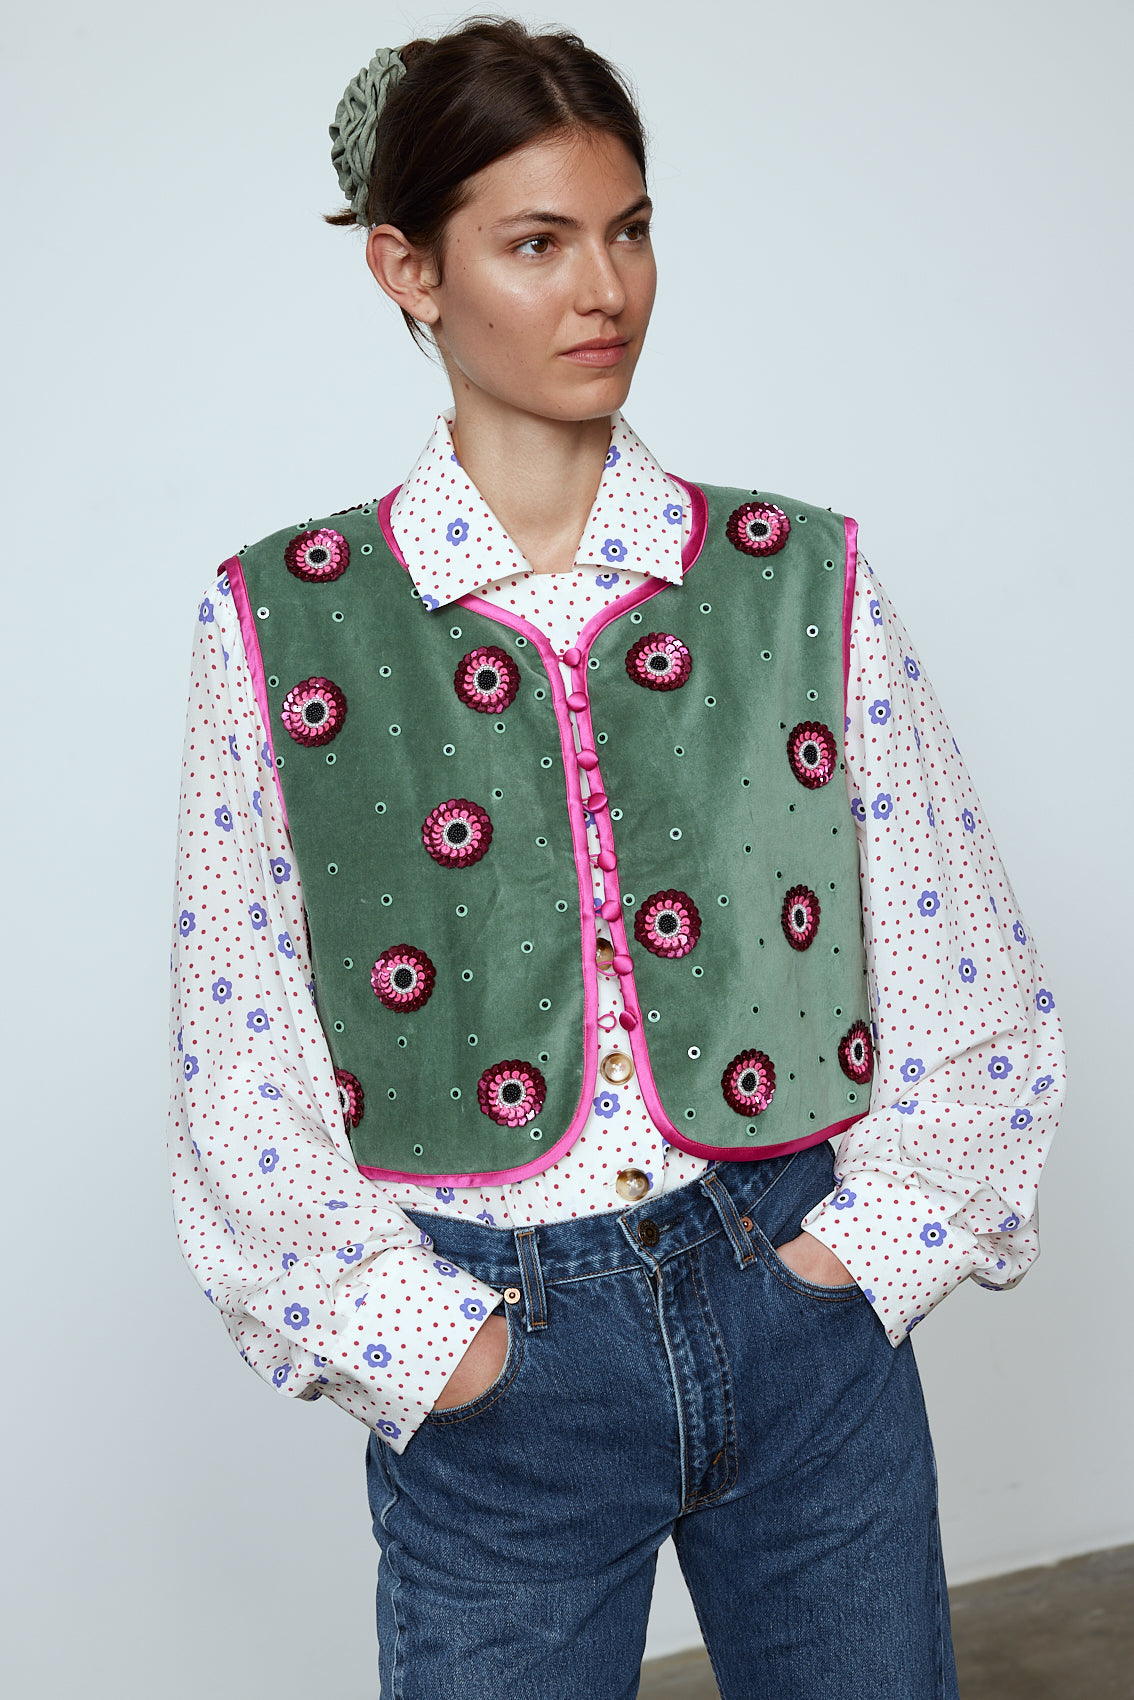 The Ravnbak Vest in Olive Green velvet with a pink lining. The vest is exquisitely hand-embroidered by skilled artisans in our flower daisy pattern using beadings and sequins. Style it over a shirt, dress, or top.  Also available in Baby Pink.